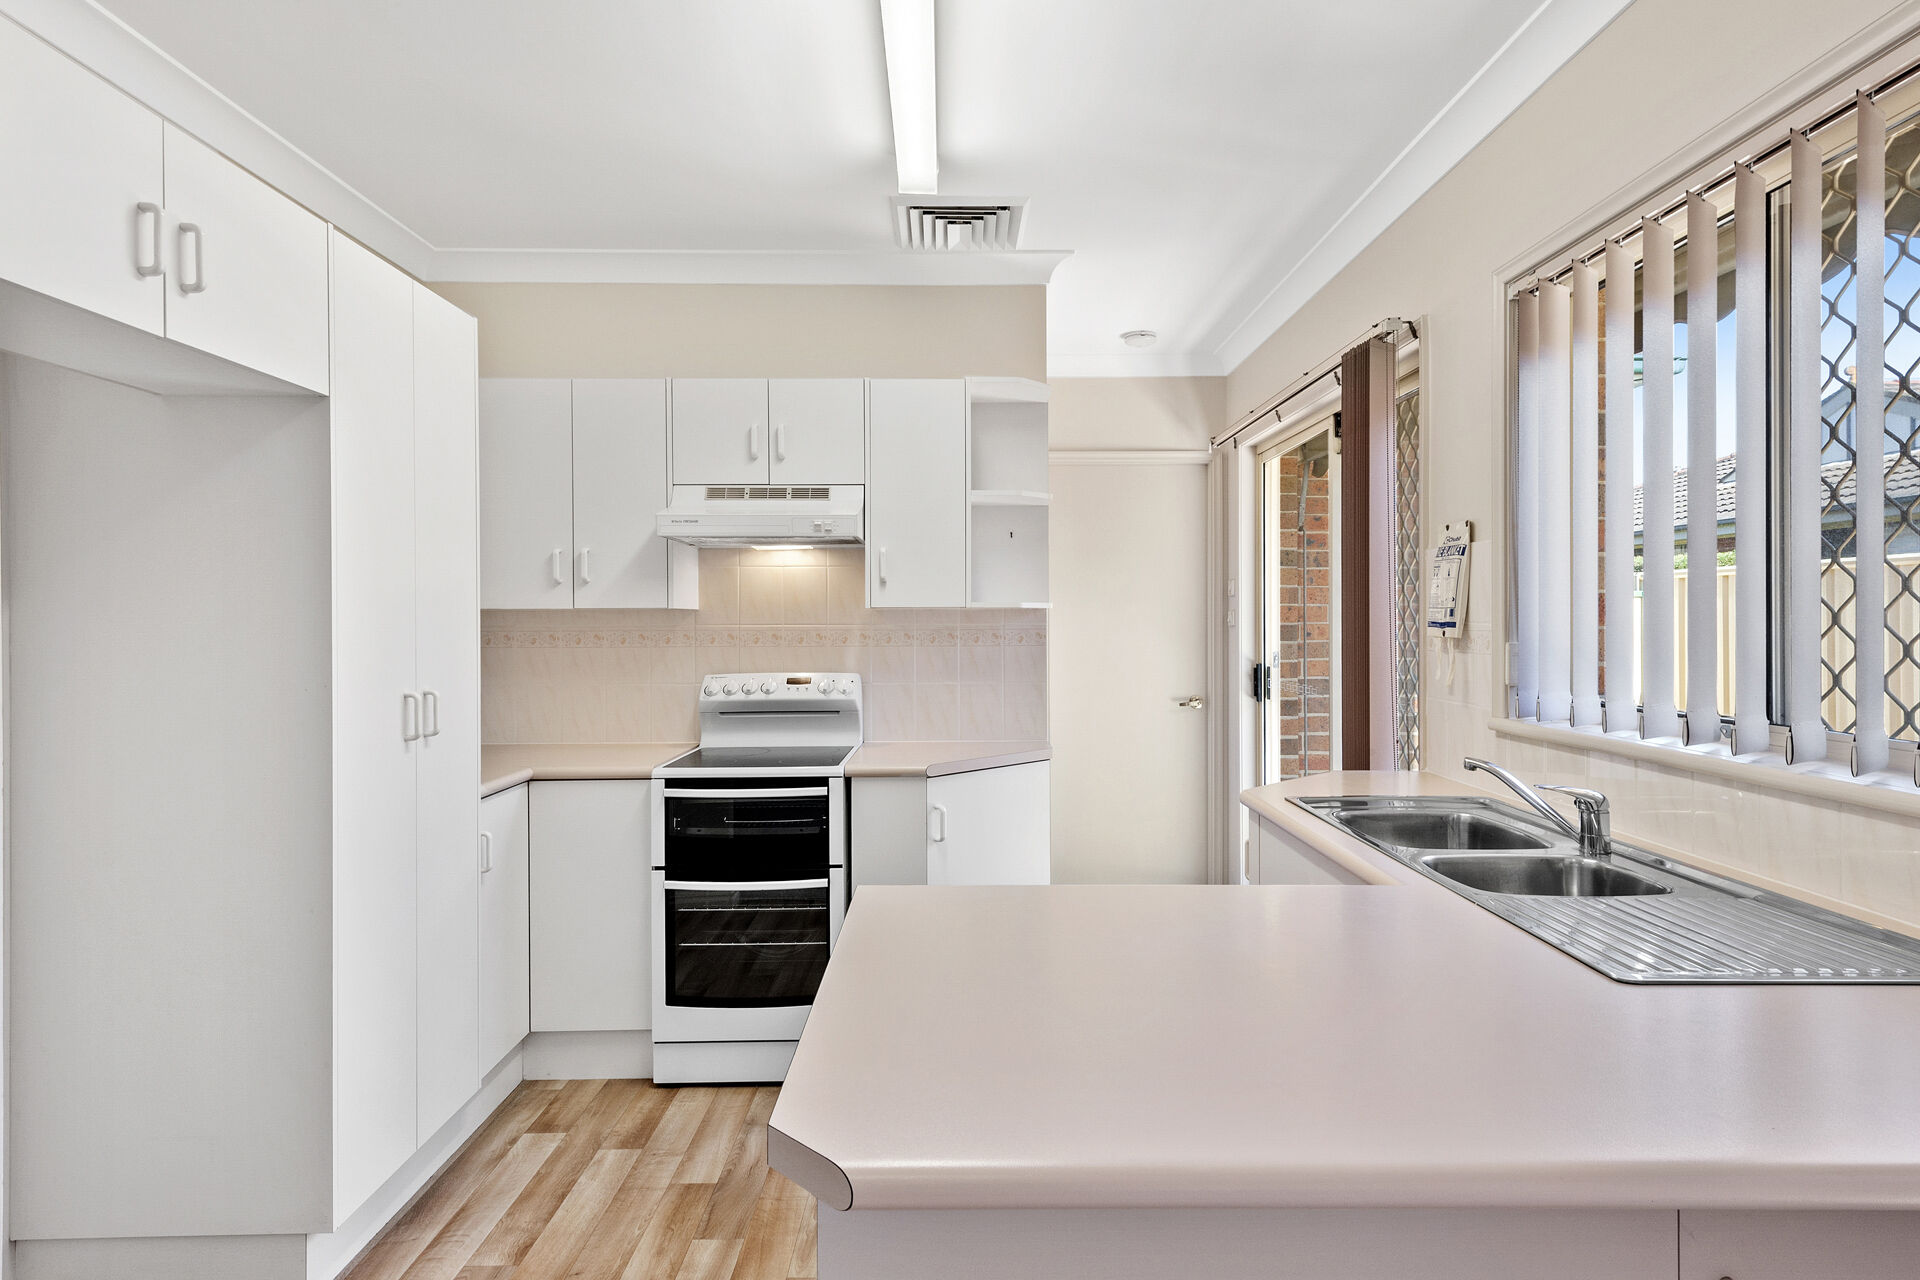 spacious kitchen with storage and natural light in the 2 bedroom home at the over 55s baptistcare All Saints retirement village in New Lambton Newcastle